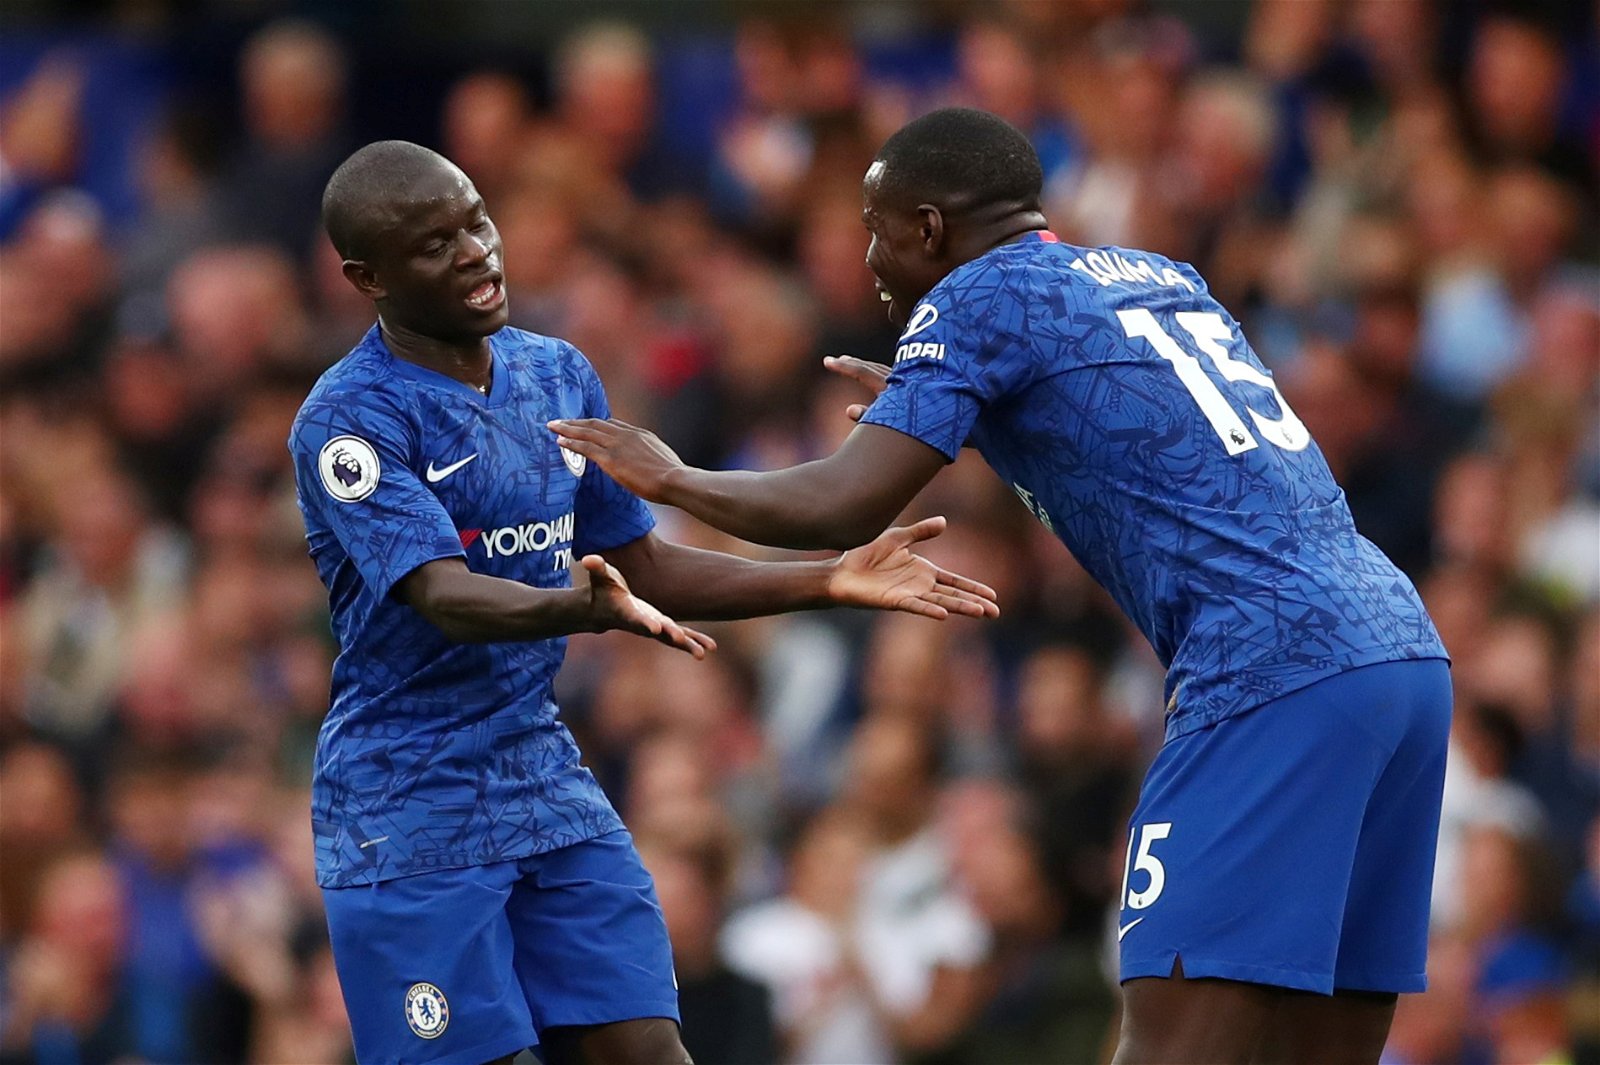 Former Chelsea boss Maurizio Sarri asks Juventus to sign his pupil N’Golo Kante